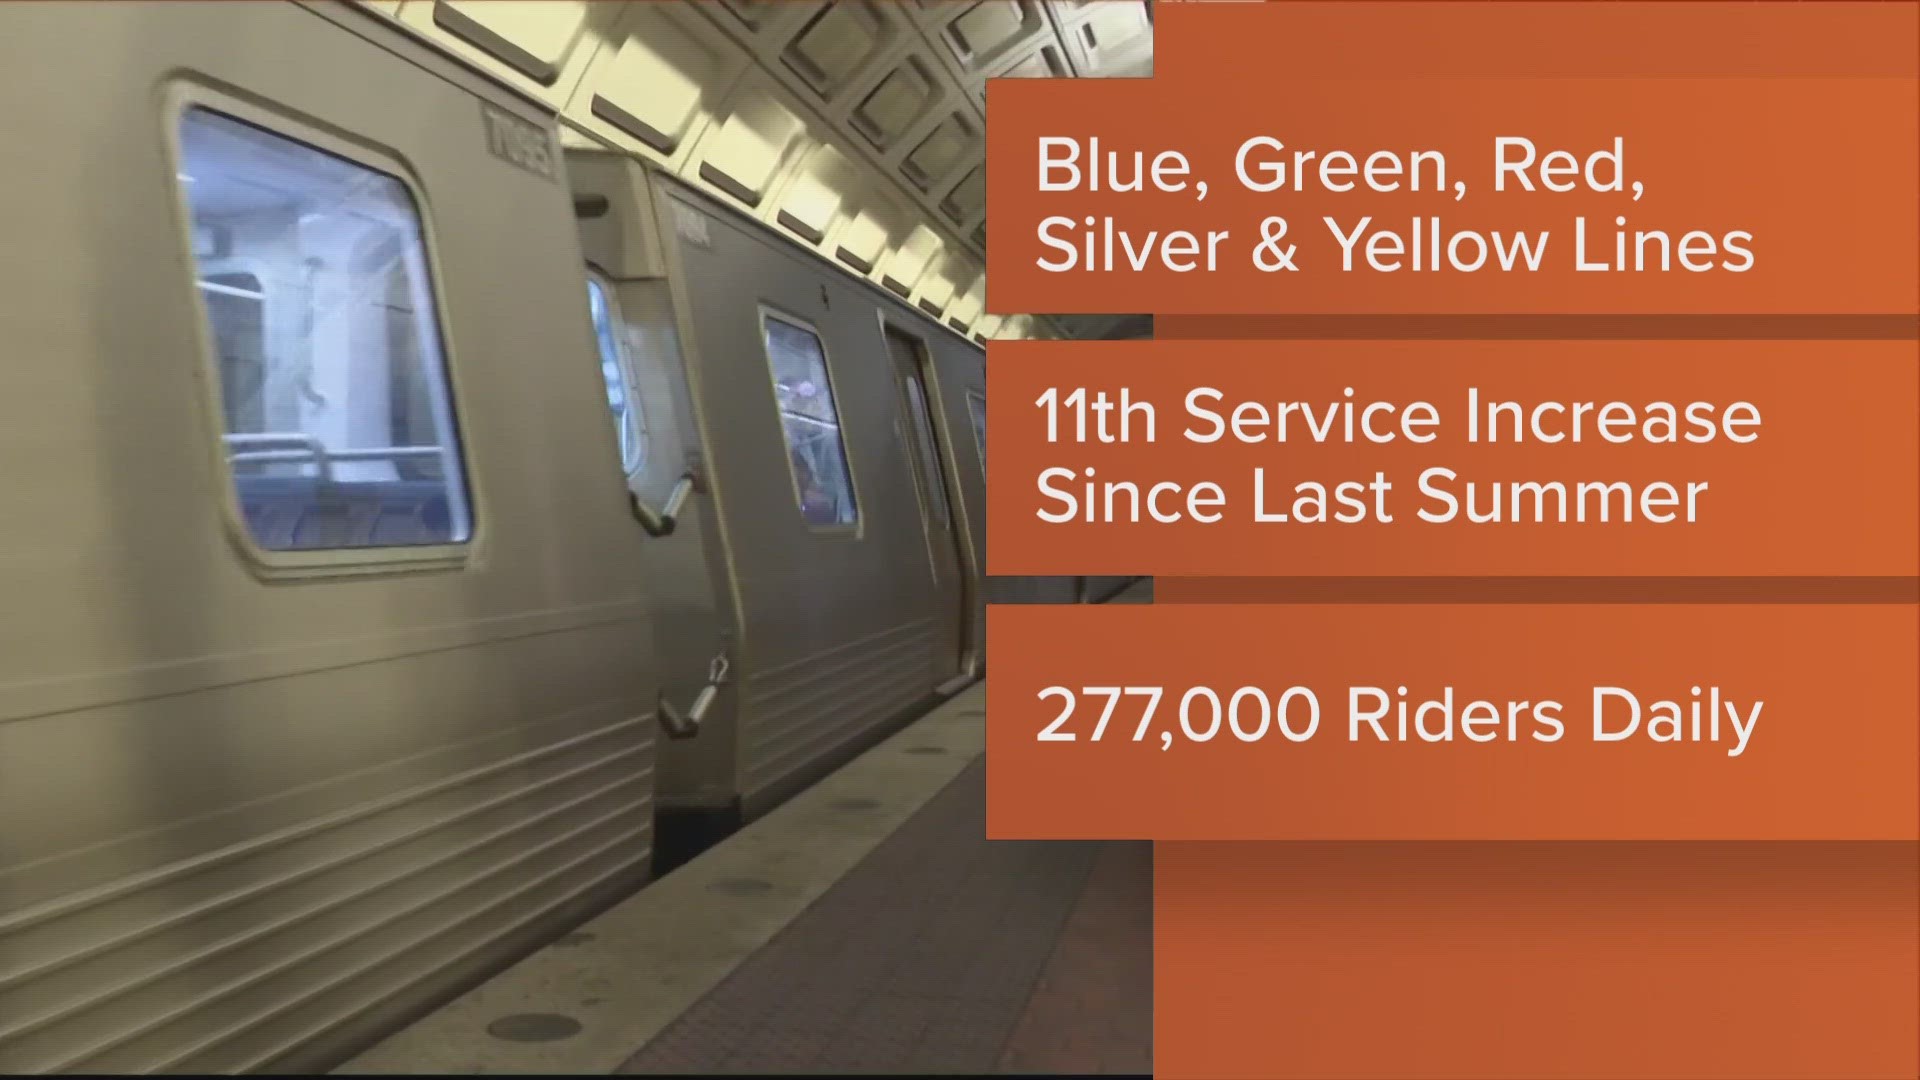 Metro is now running more trains than any other time in its 47 year history.